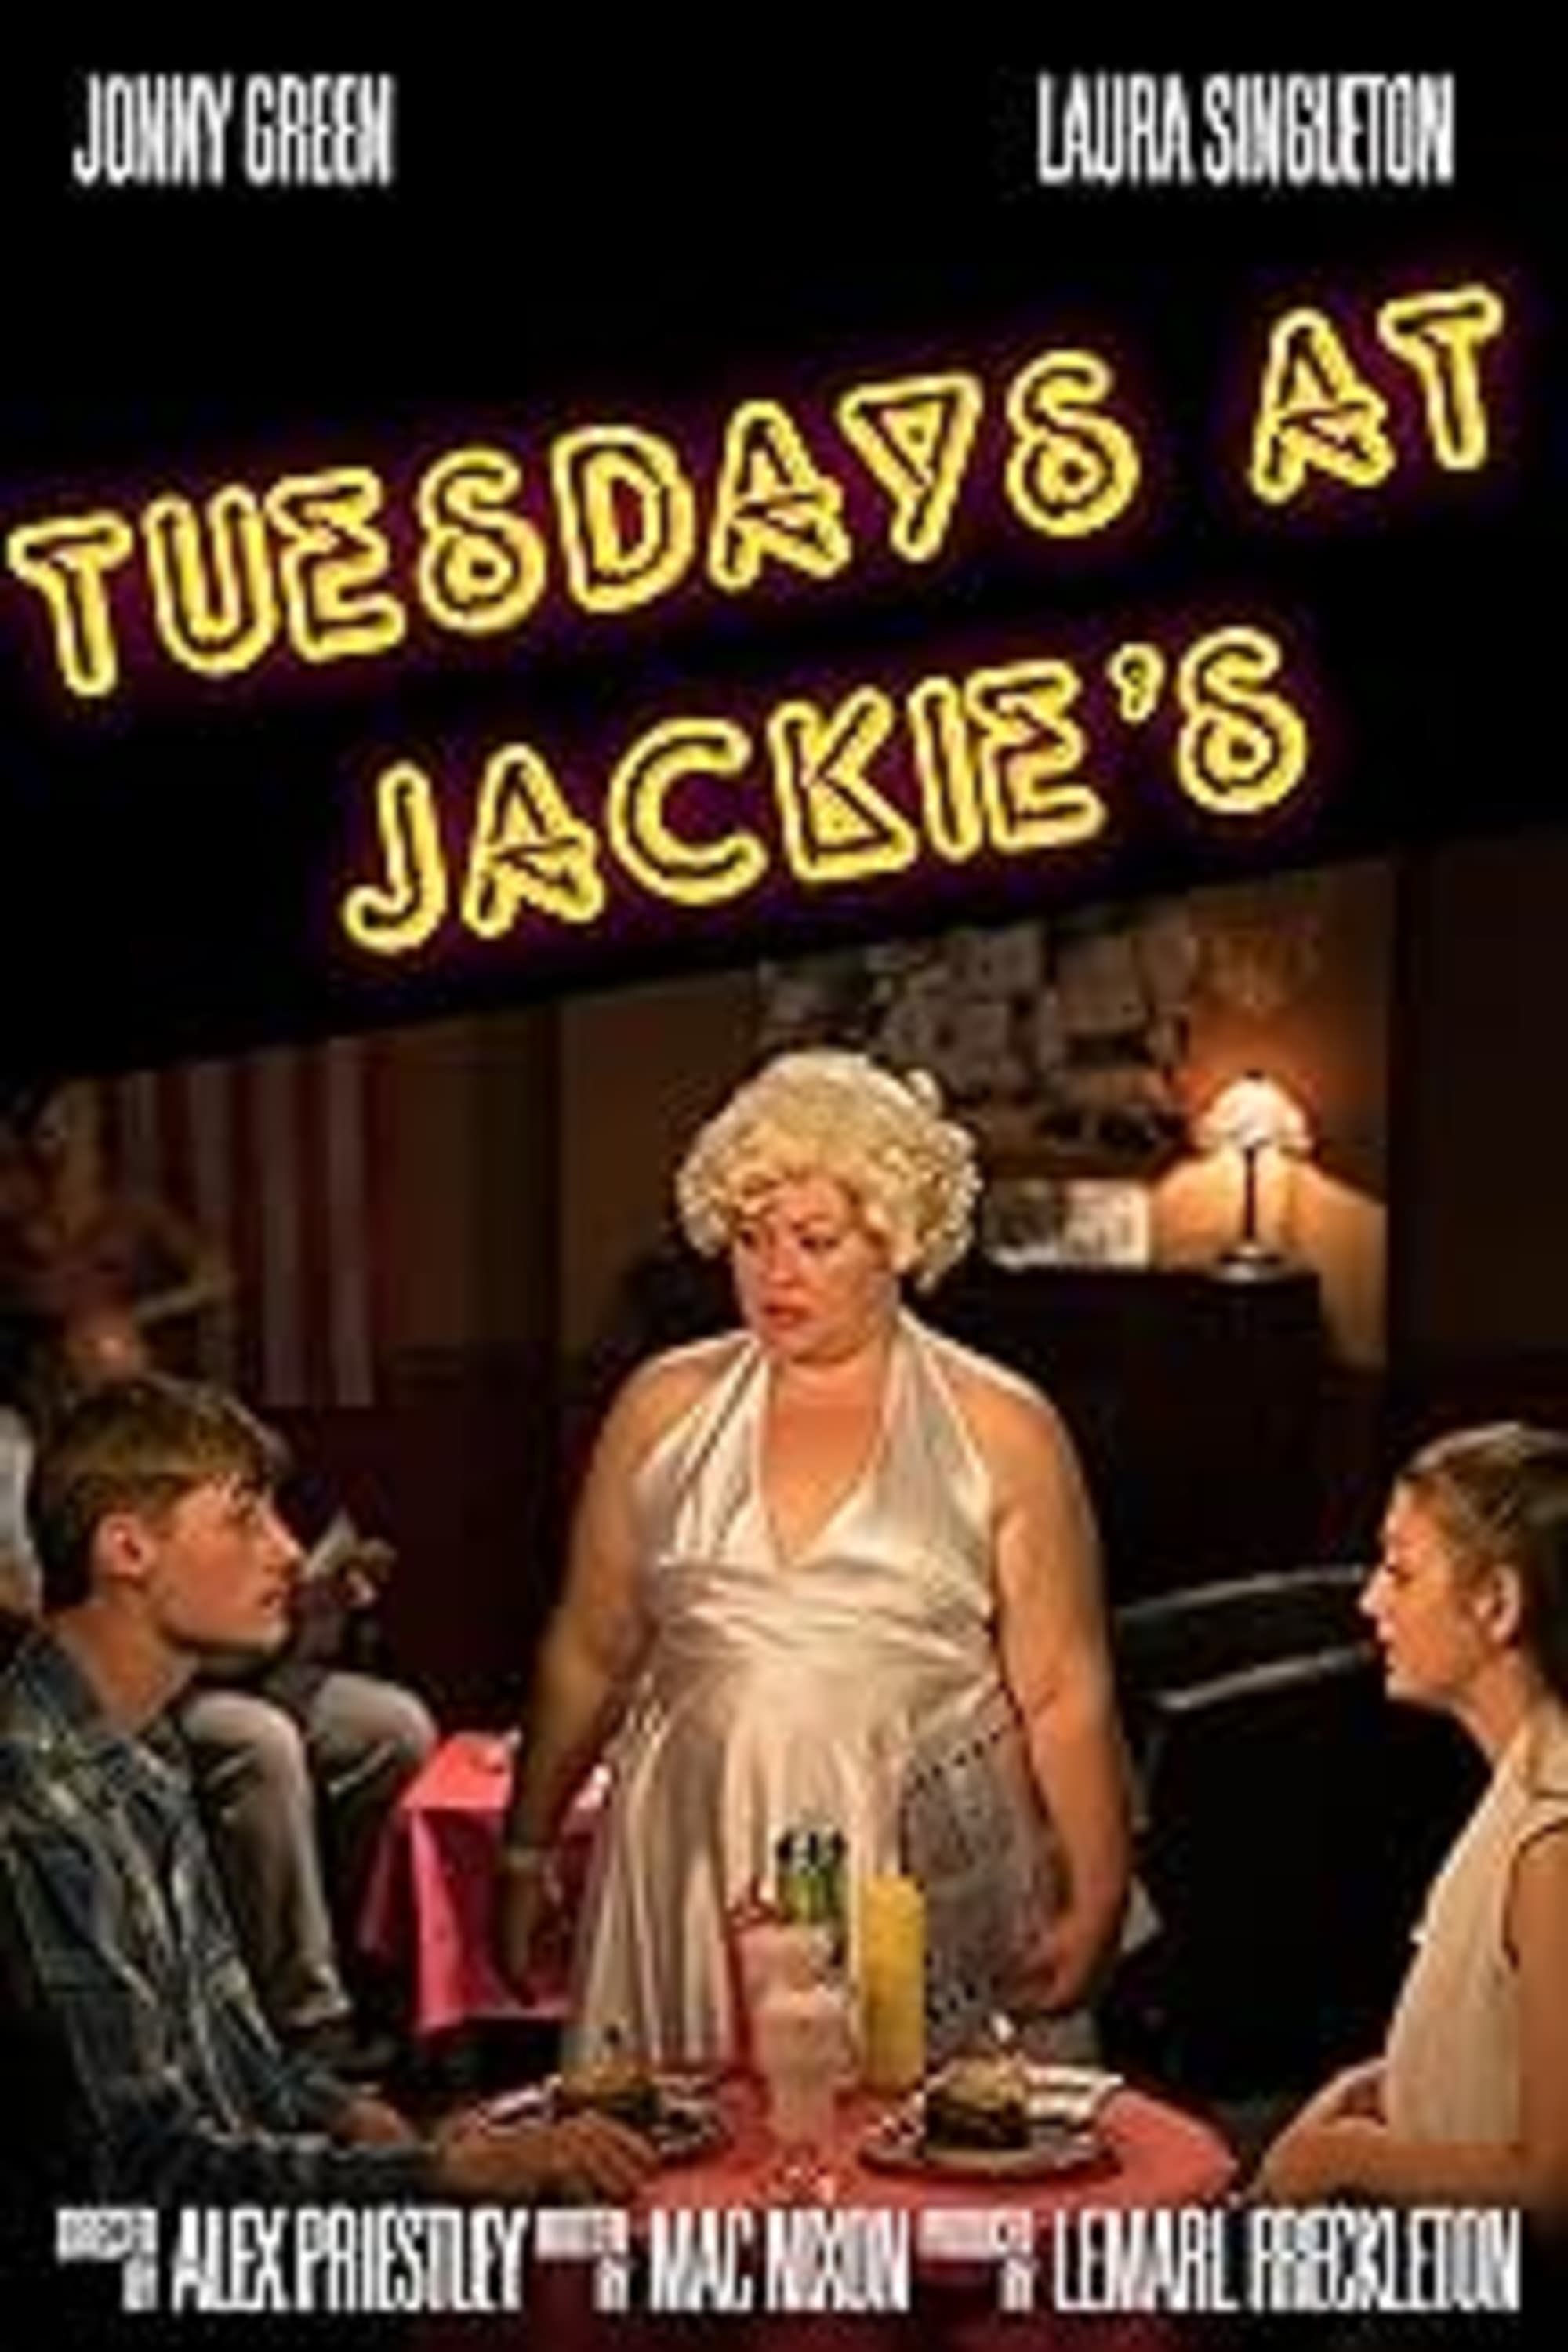 Tuesday at Jackie's